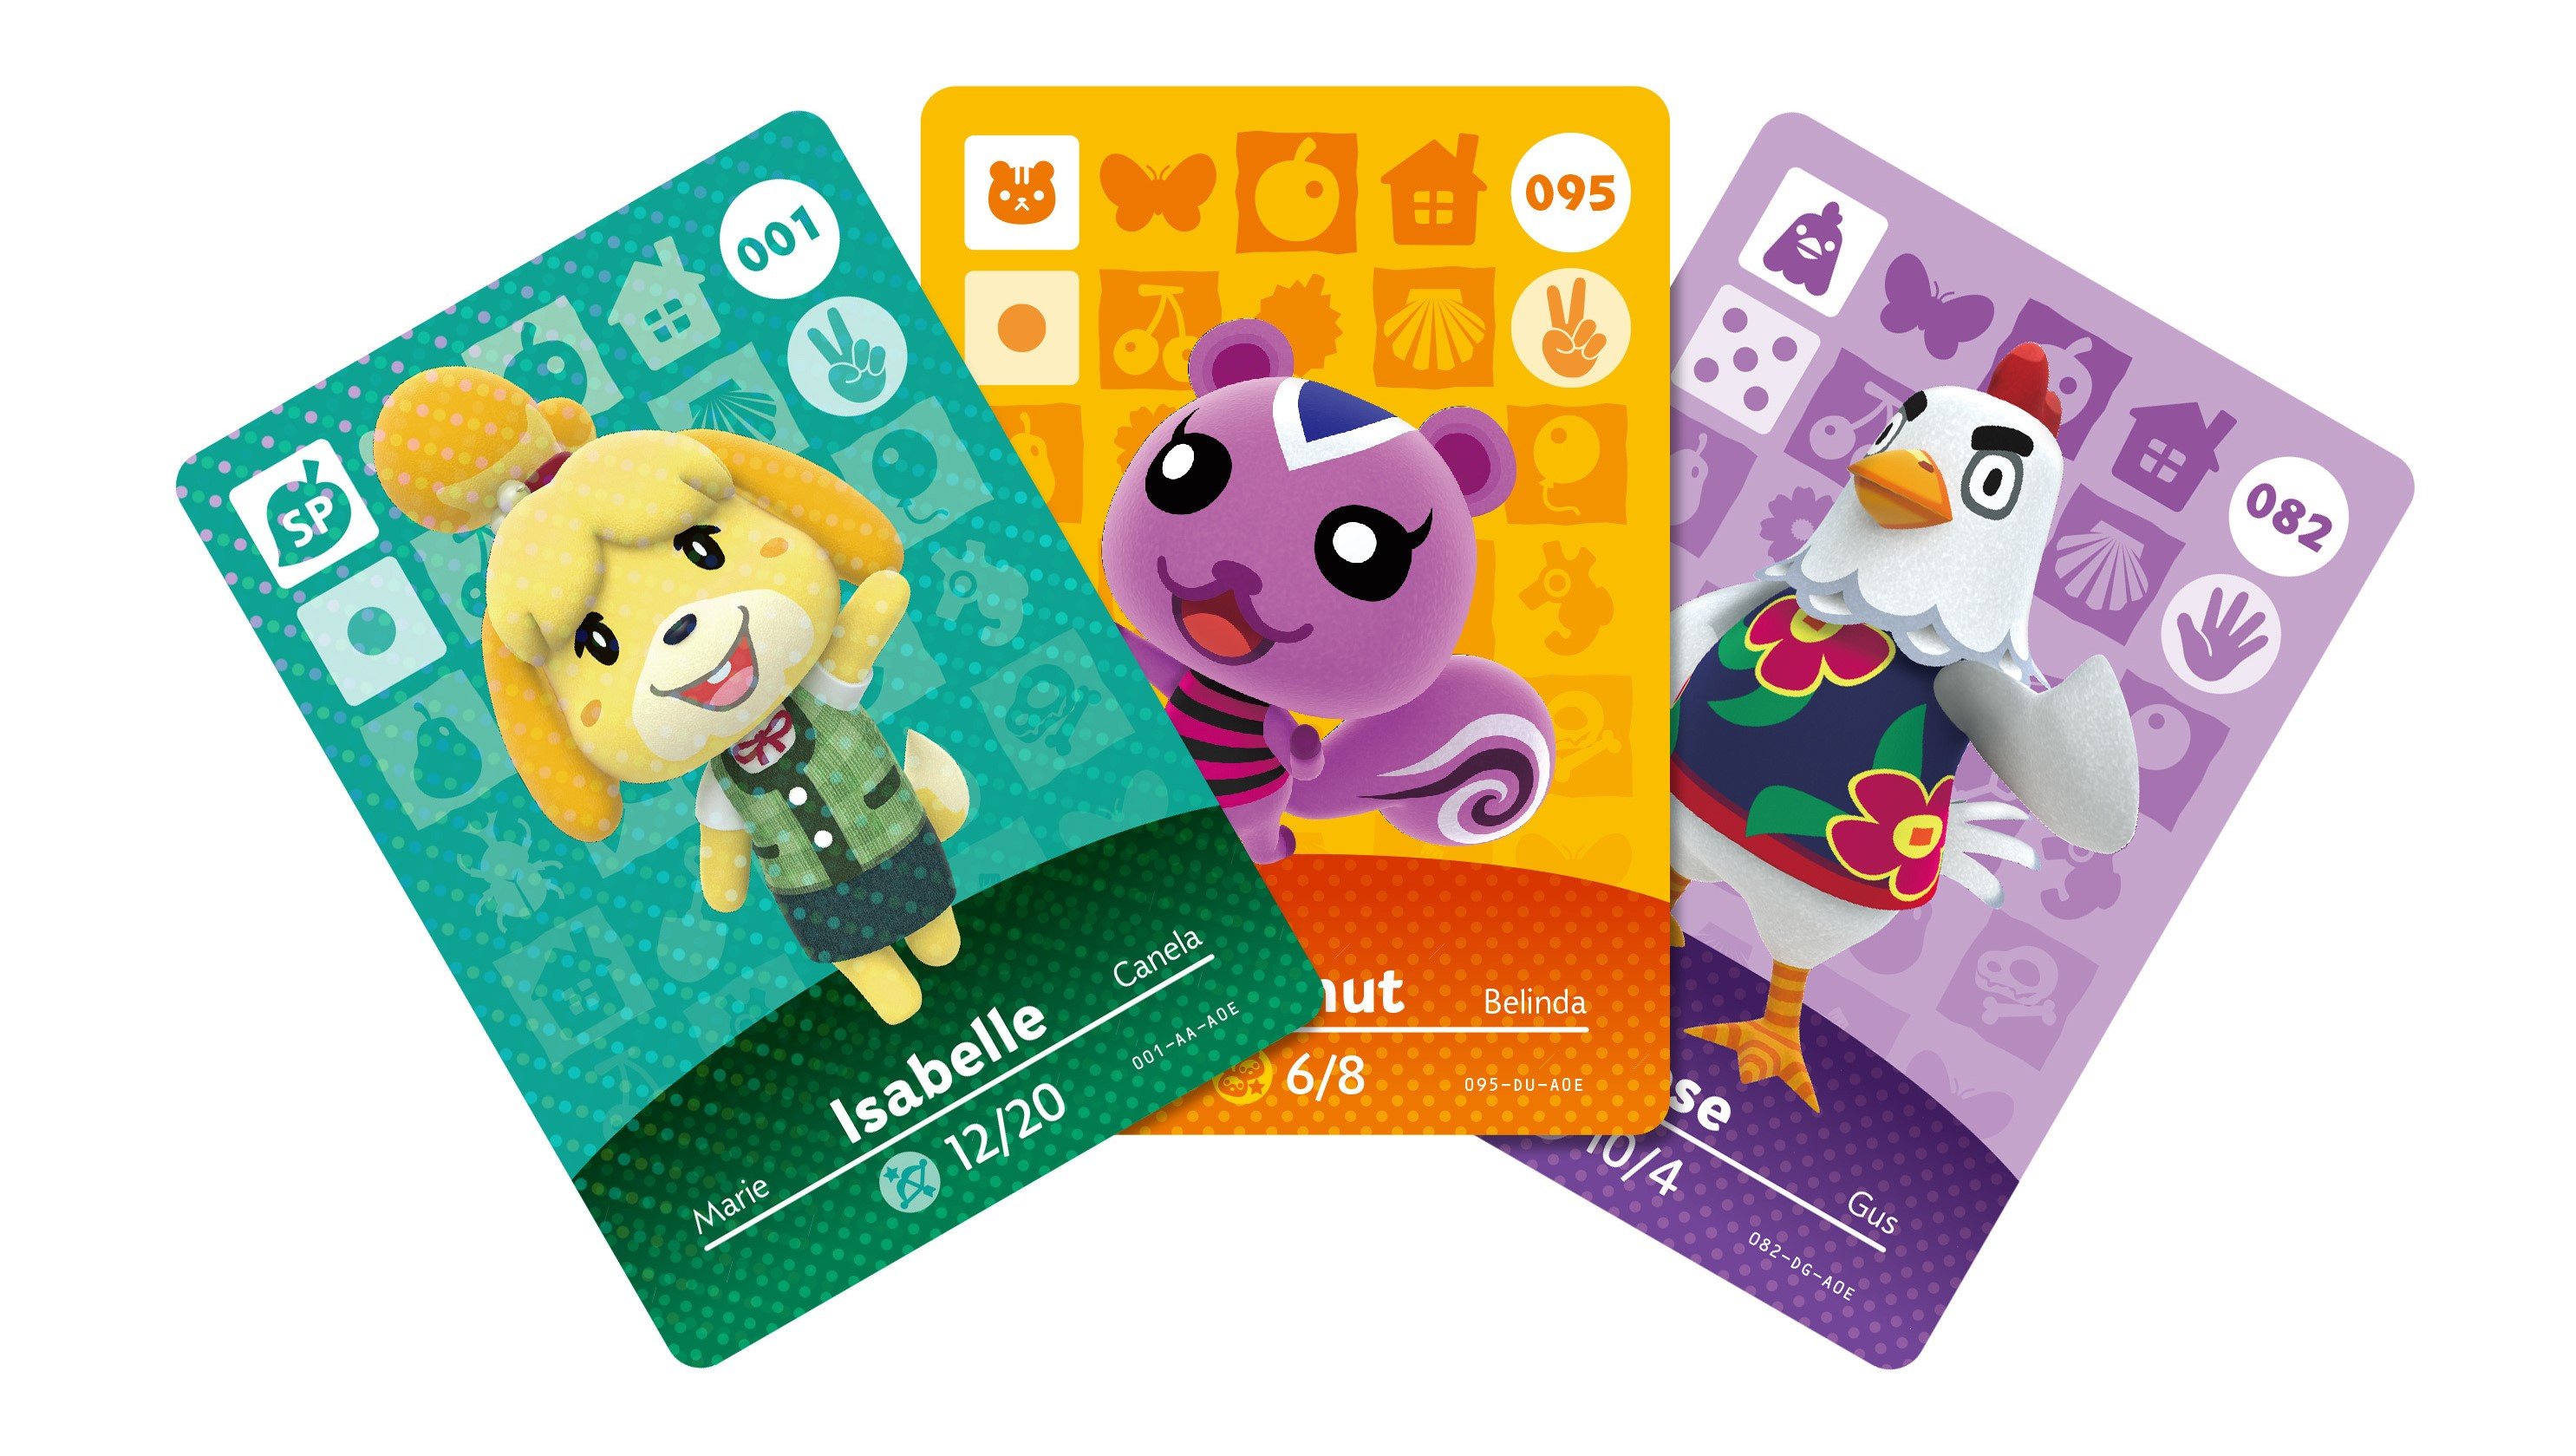 amiibo-sales-continue-to-gain-momentum-as-over-eight-million-cards-are